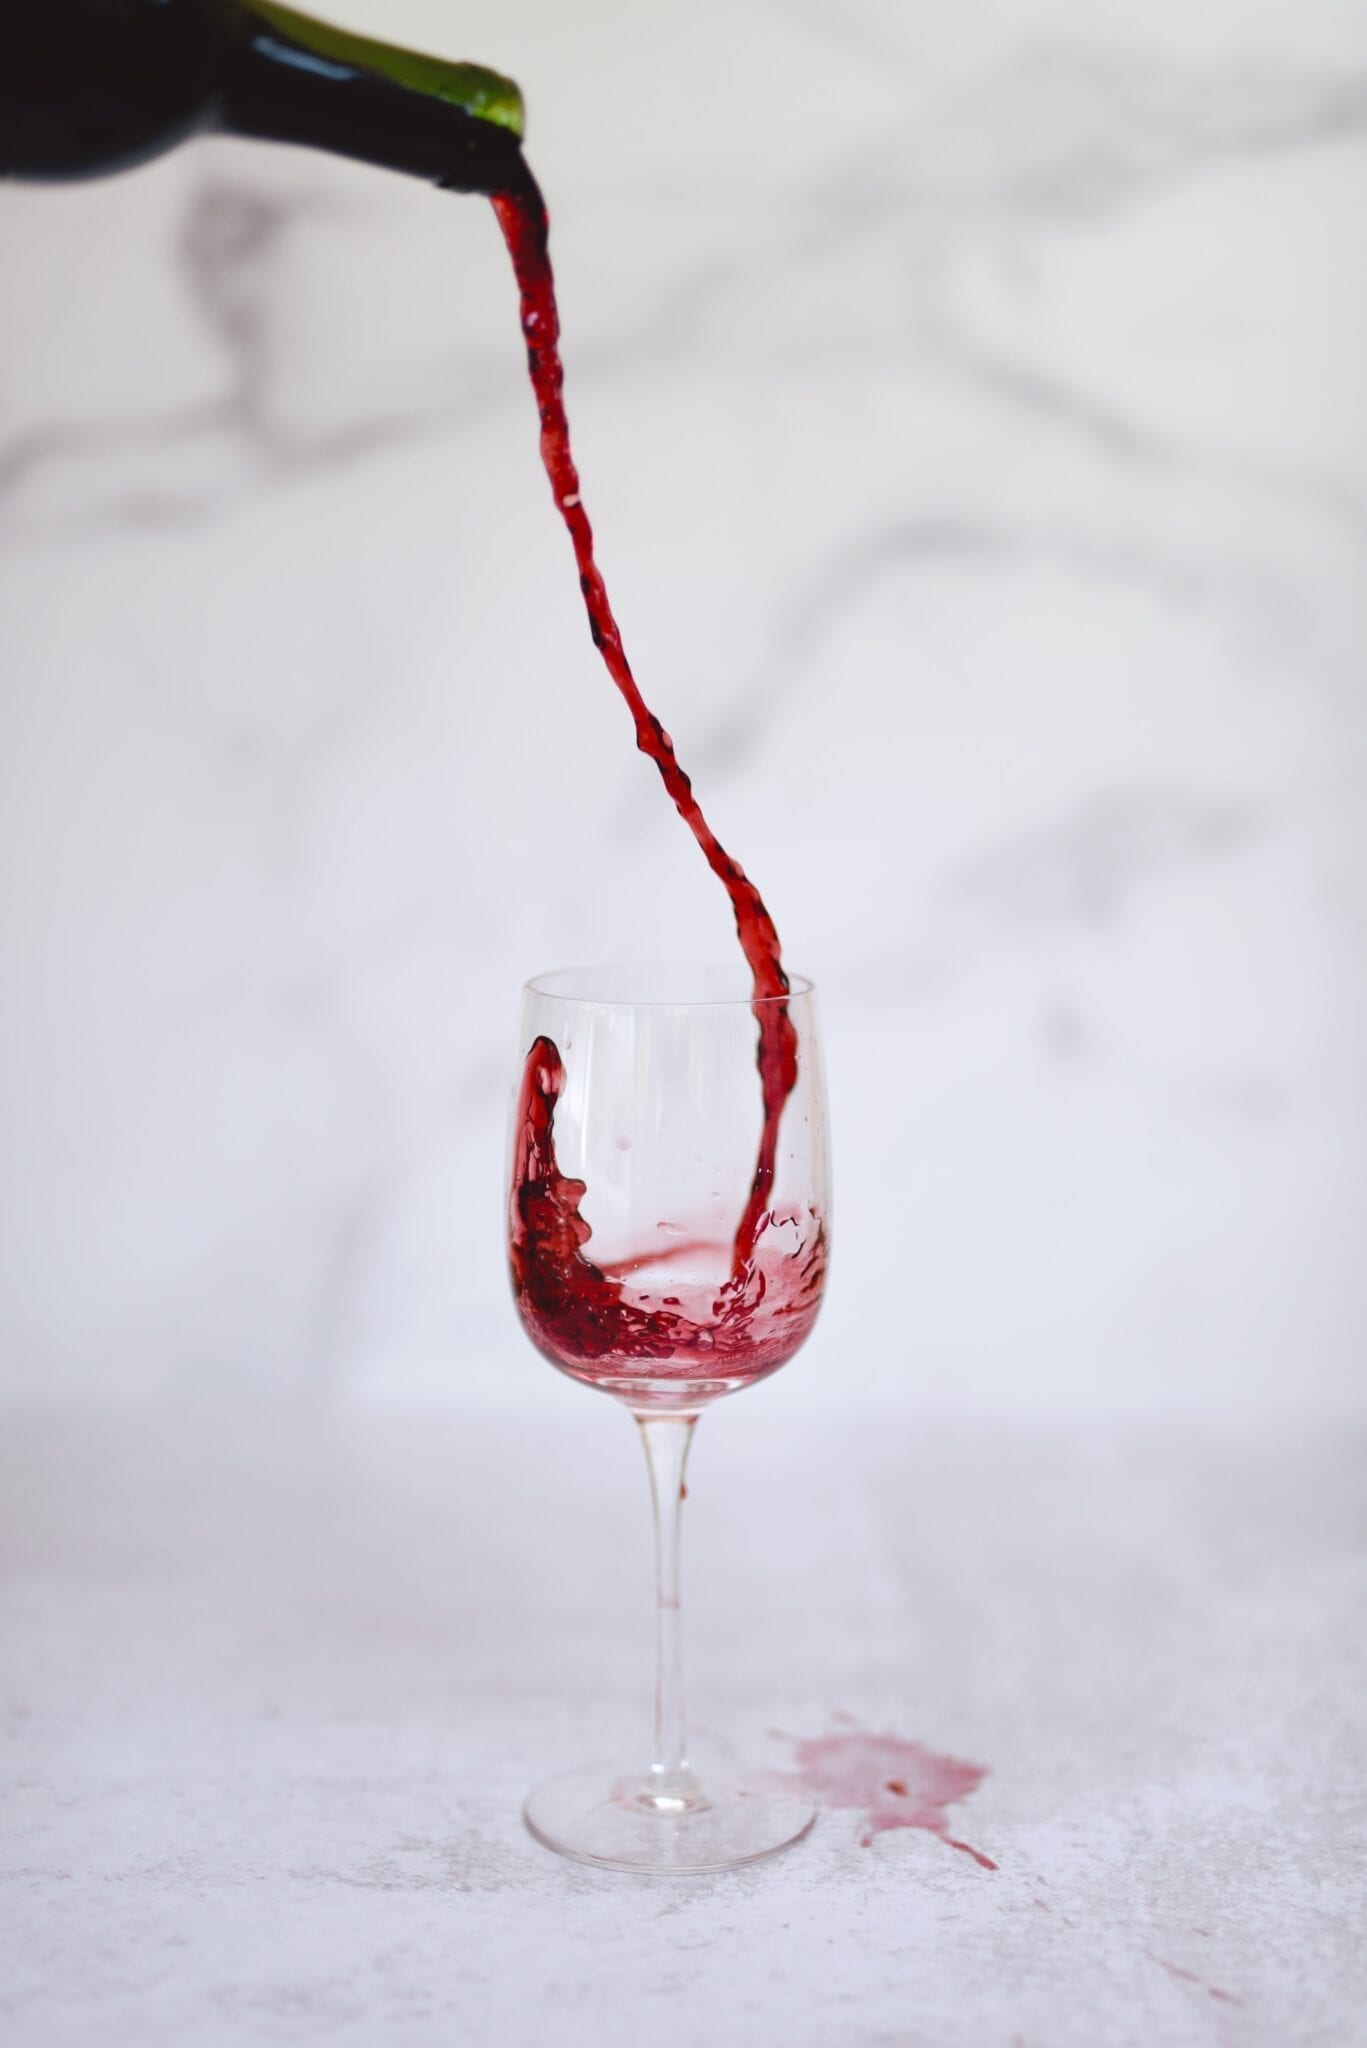 Pouring red wine. Photo by Christian Bowen, Unsplash